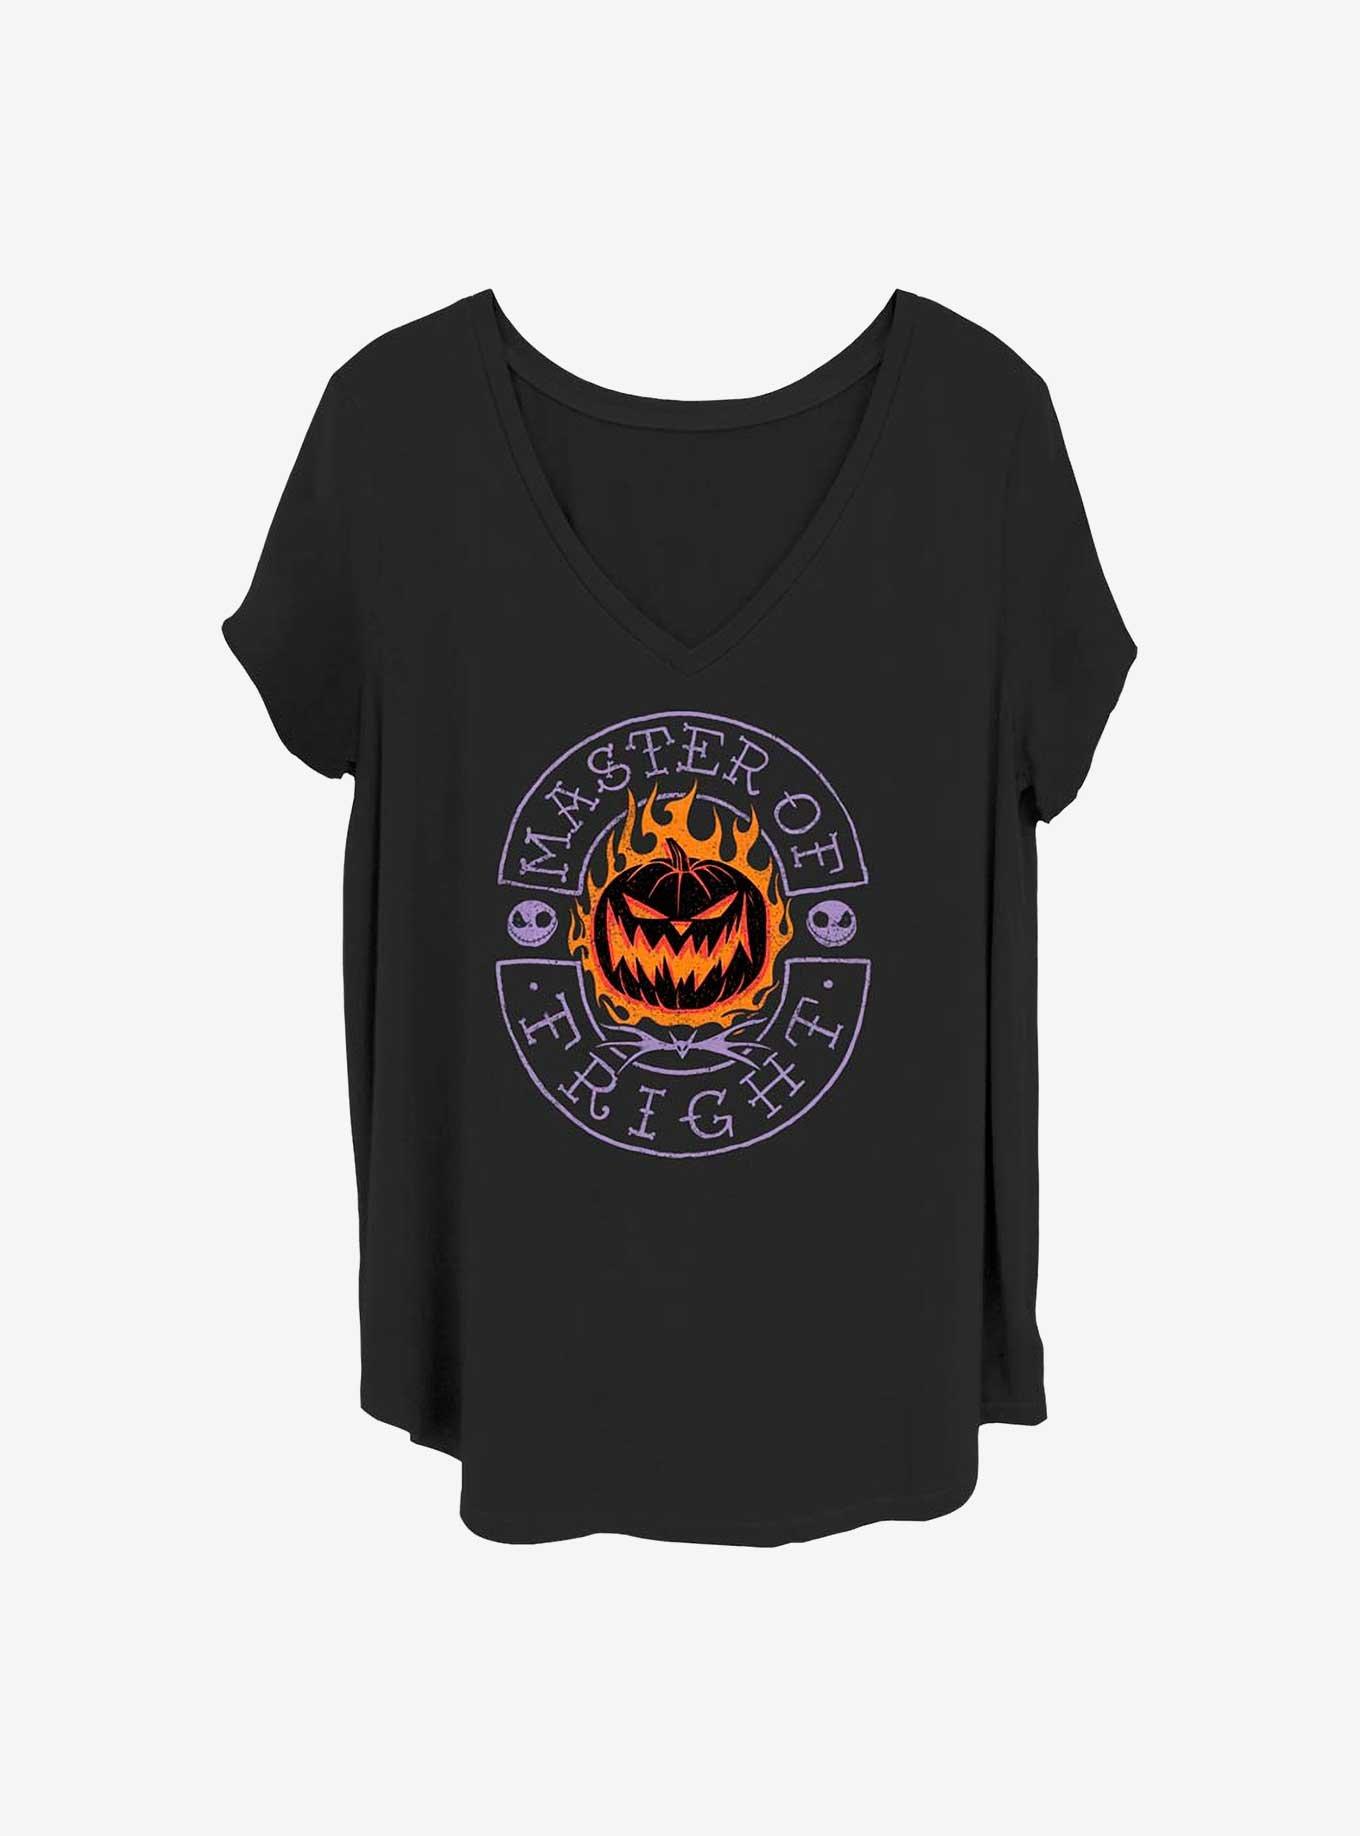 Disney The Nightmare Before Christmas Master of Fright Girls T-Shirt Plus Size, BLACK, hi-res